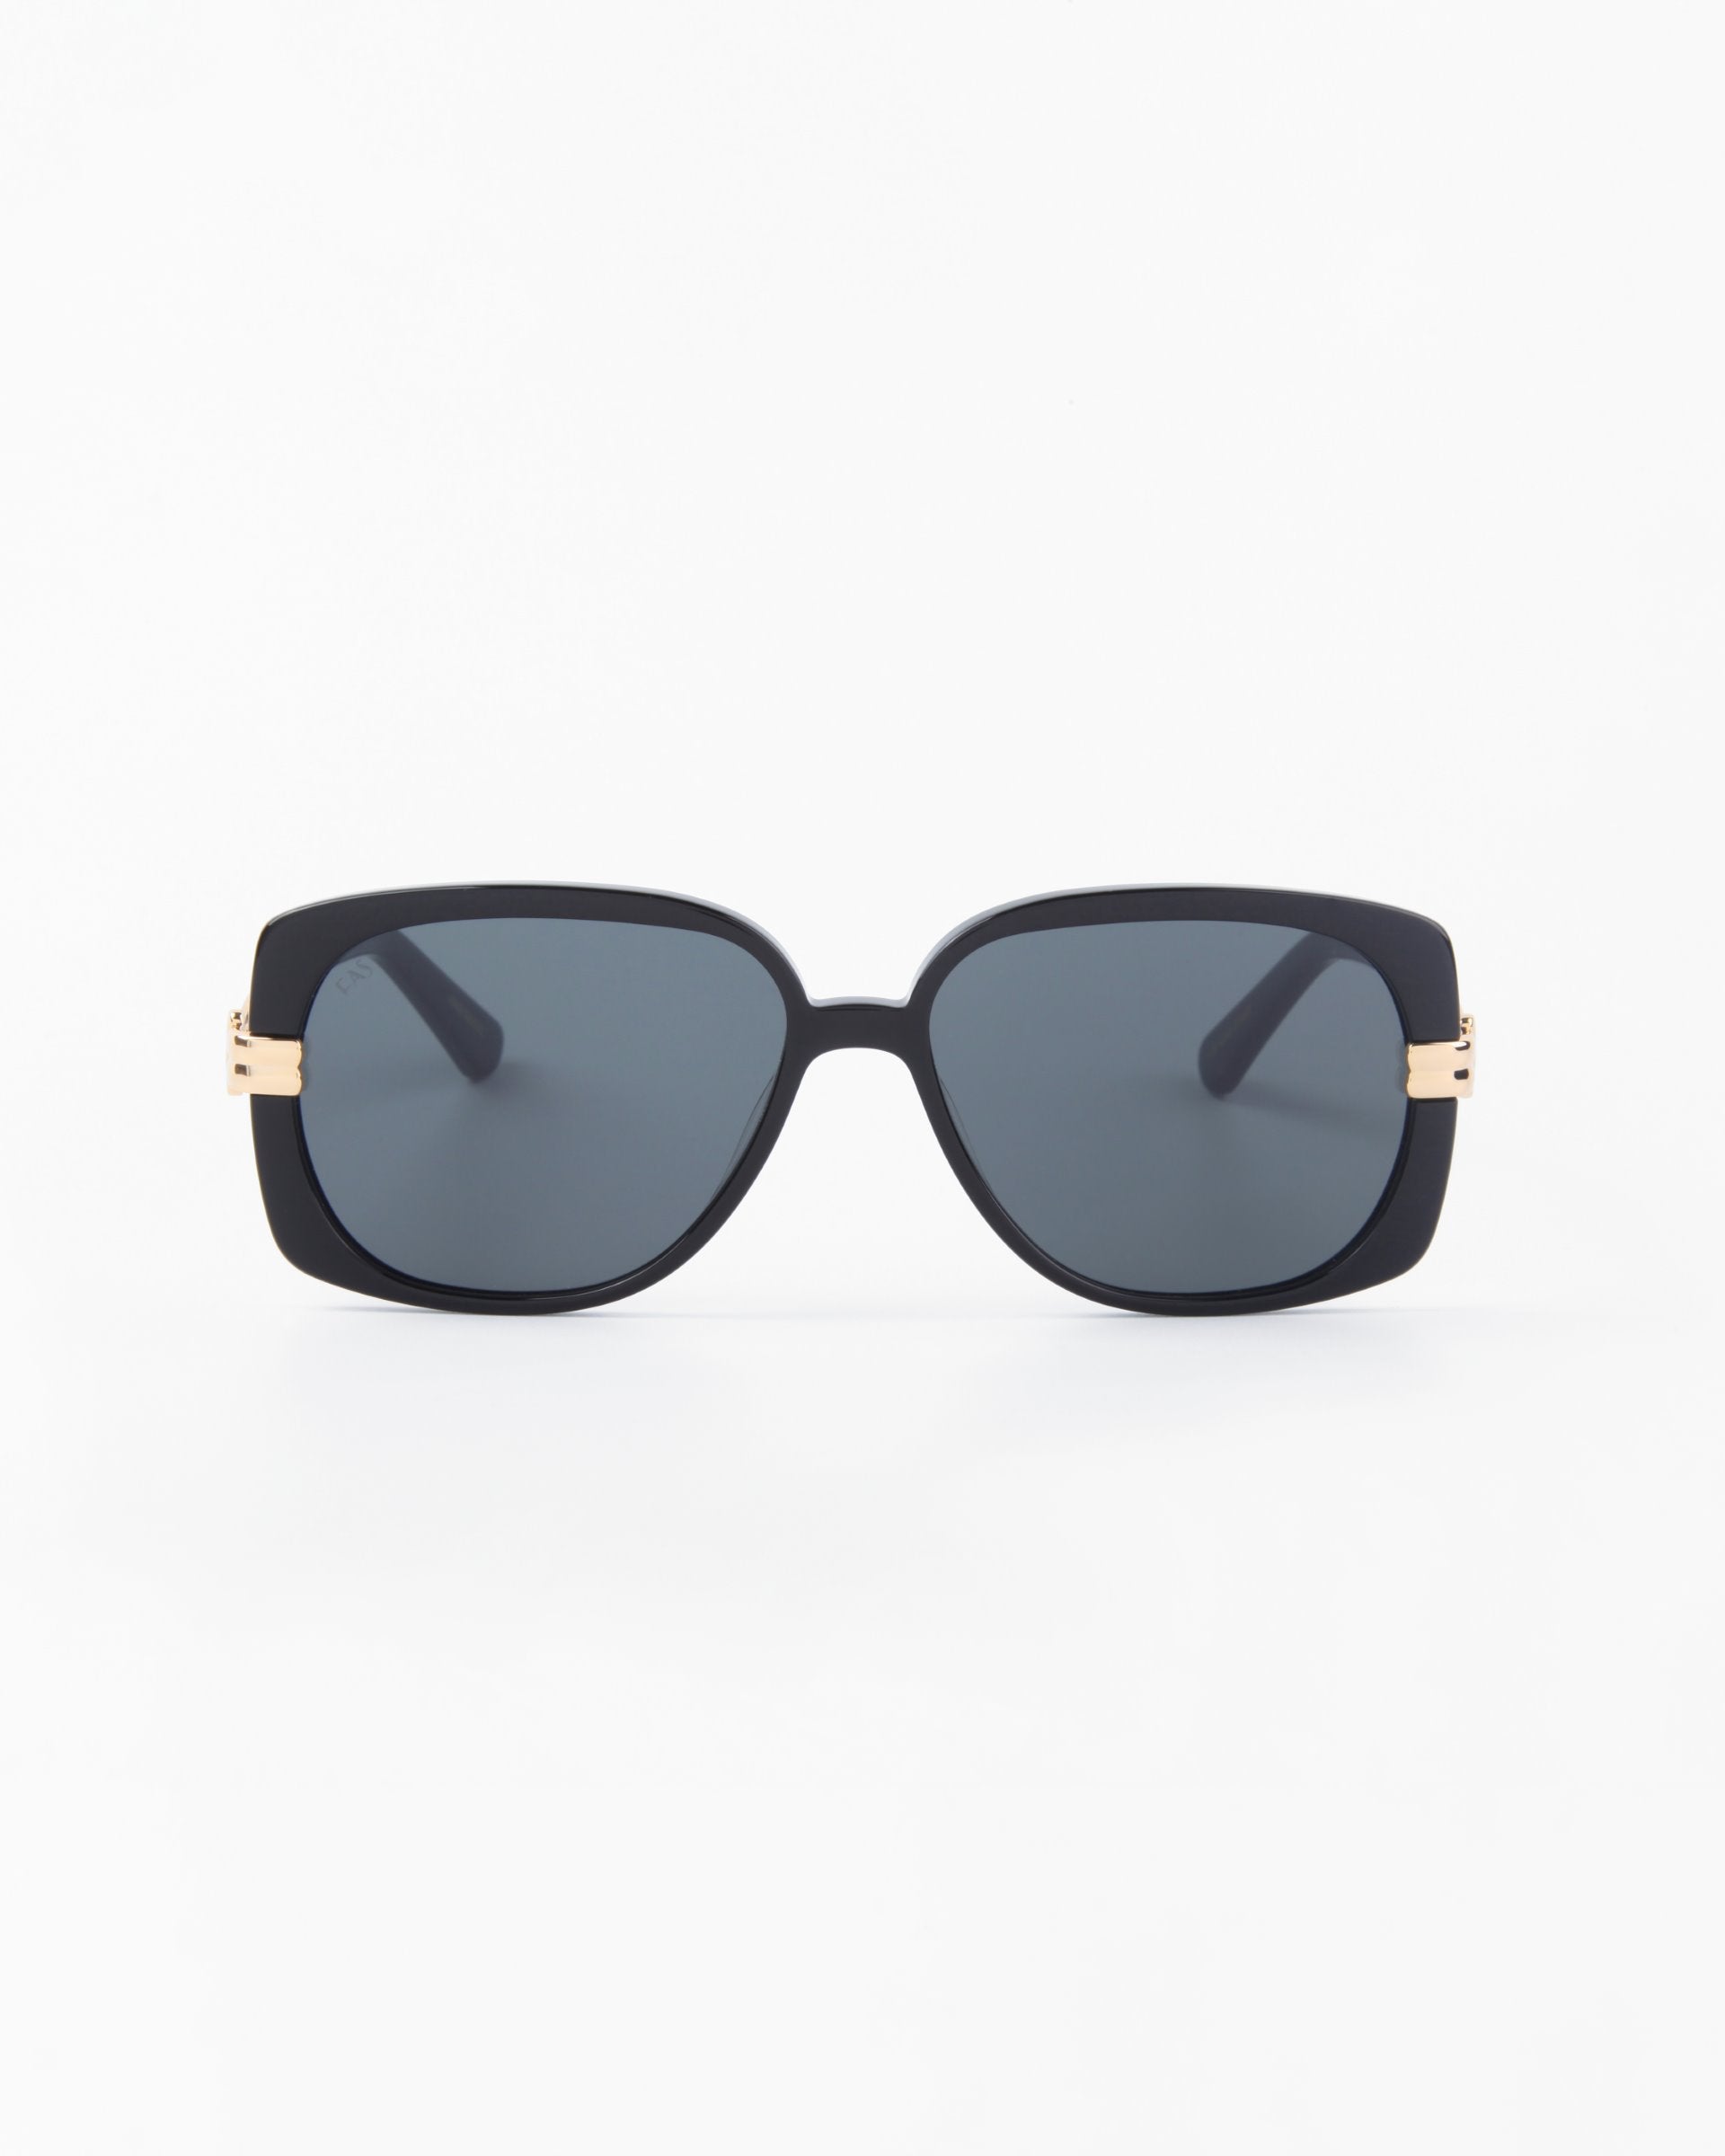 A pair of black rectangular For Art's Sake® Icon sunglasses with dark, shatter-resistant nylon lenses. The sunglasses have thin temples, small gold accents near the hinges, and offer full UVA & UVB protection. Handmade with precision, they are set against a plain white surface.